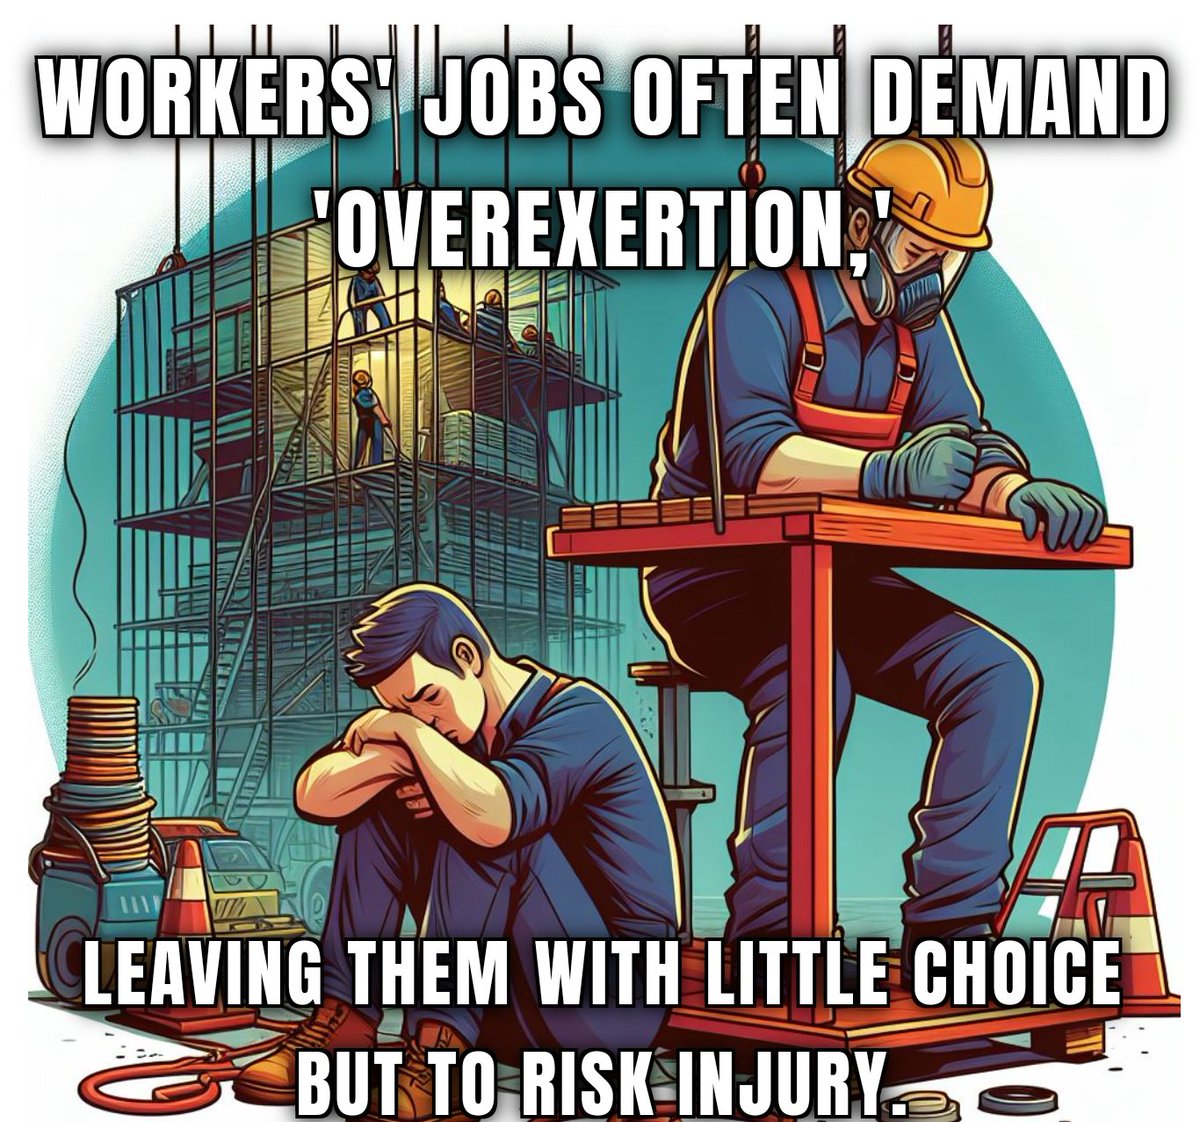 Workers are often forced into 'overexertion', risking injury because they have little choice. This isn't a choice, it's a demand. It's time for fair treatment and safe workplaces. #InjuredWorkersUnite #FairTreatment